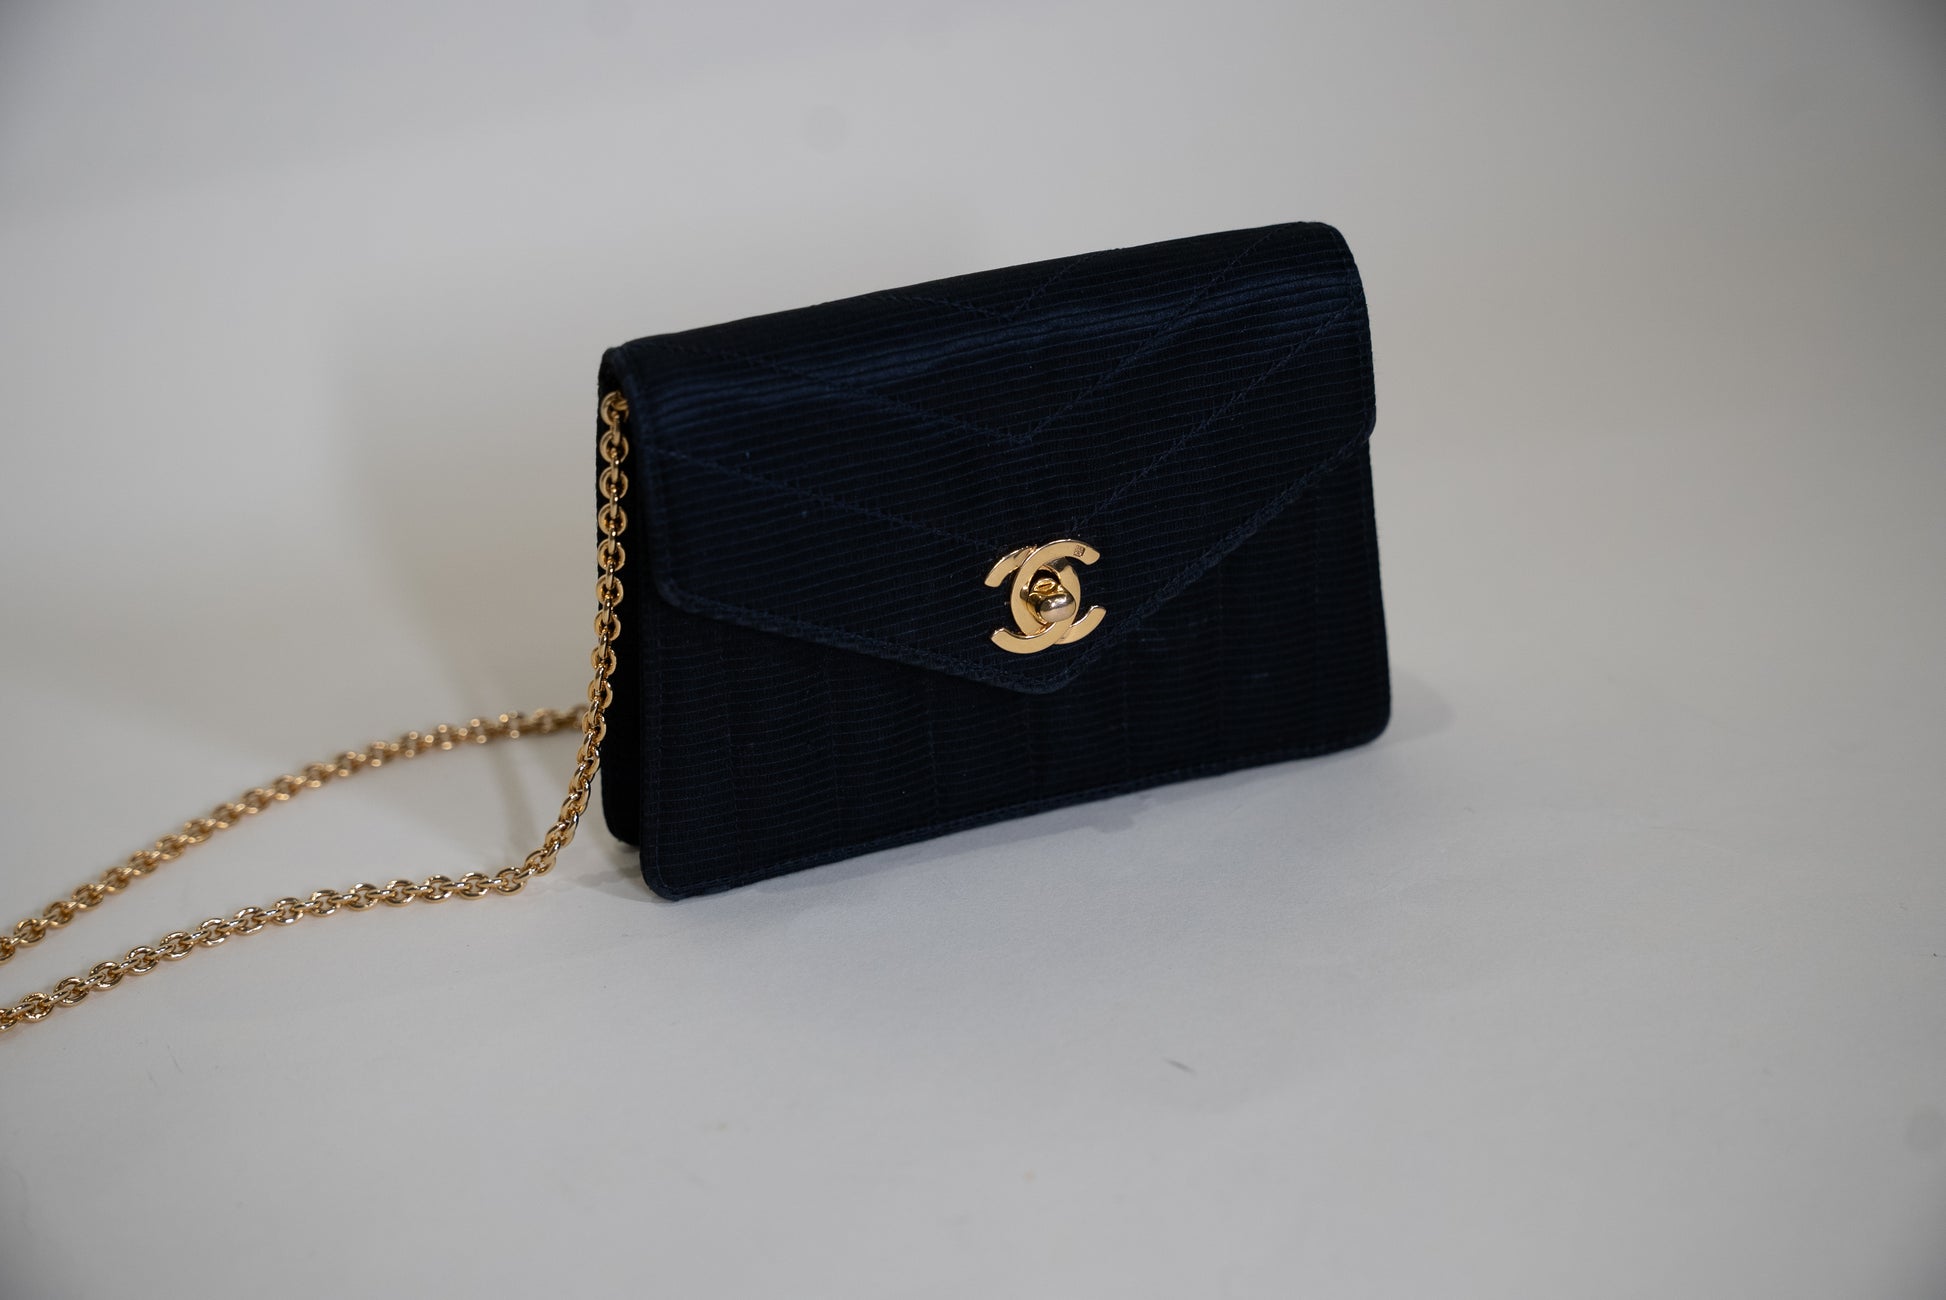 CHANEL, Bags, Chanel Blue Satin Envelope Quilted Envelope Clutch